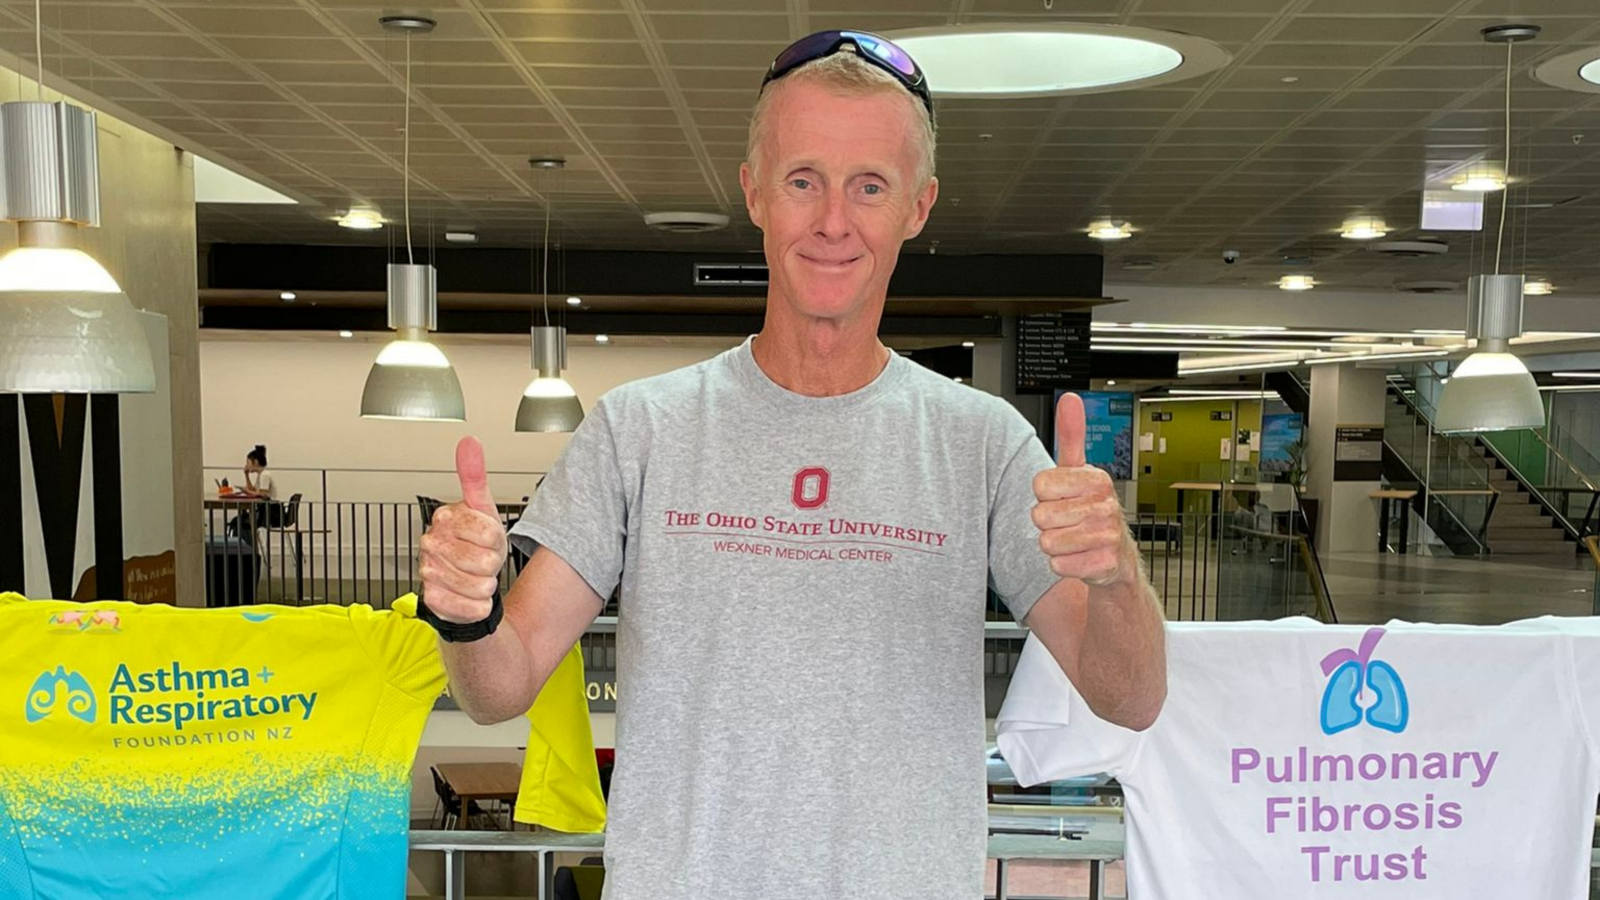 Marketing Professer Nick Ashill stands with two thumbs up in front of tshirts promoting the Pulmonary Fibrosis Trust and New Zealand Asthma and Respiratory Foundation